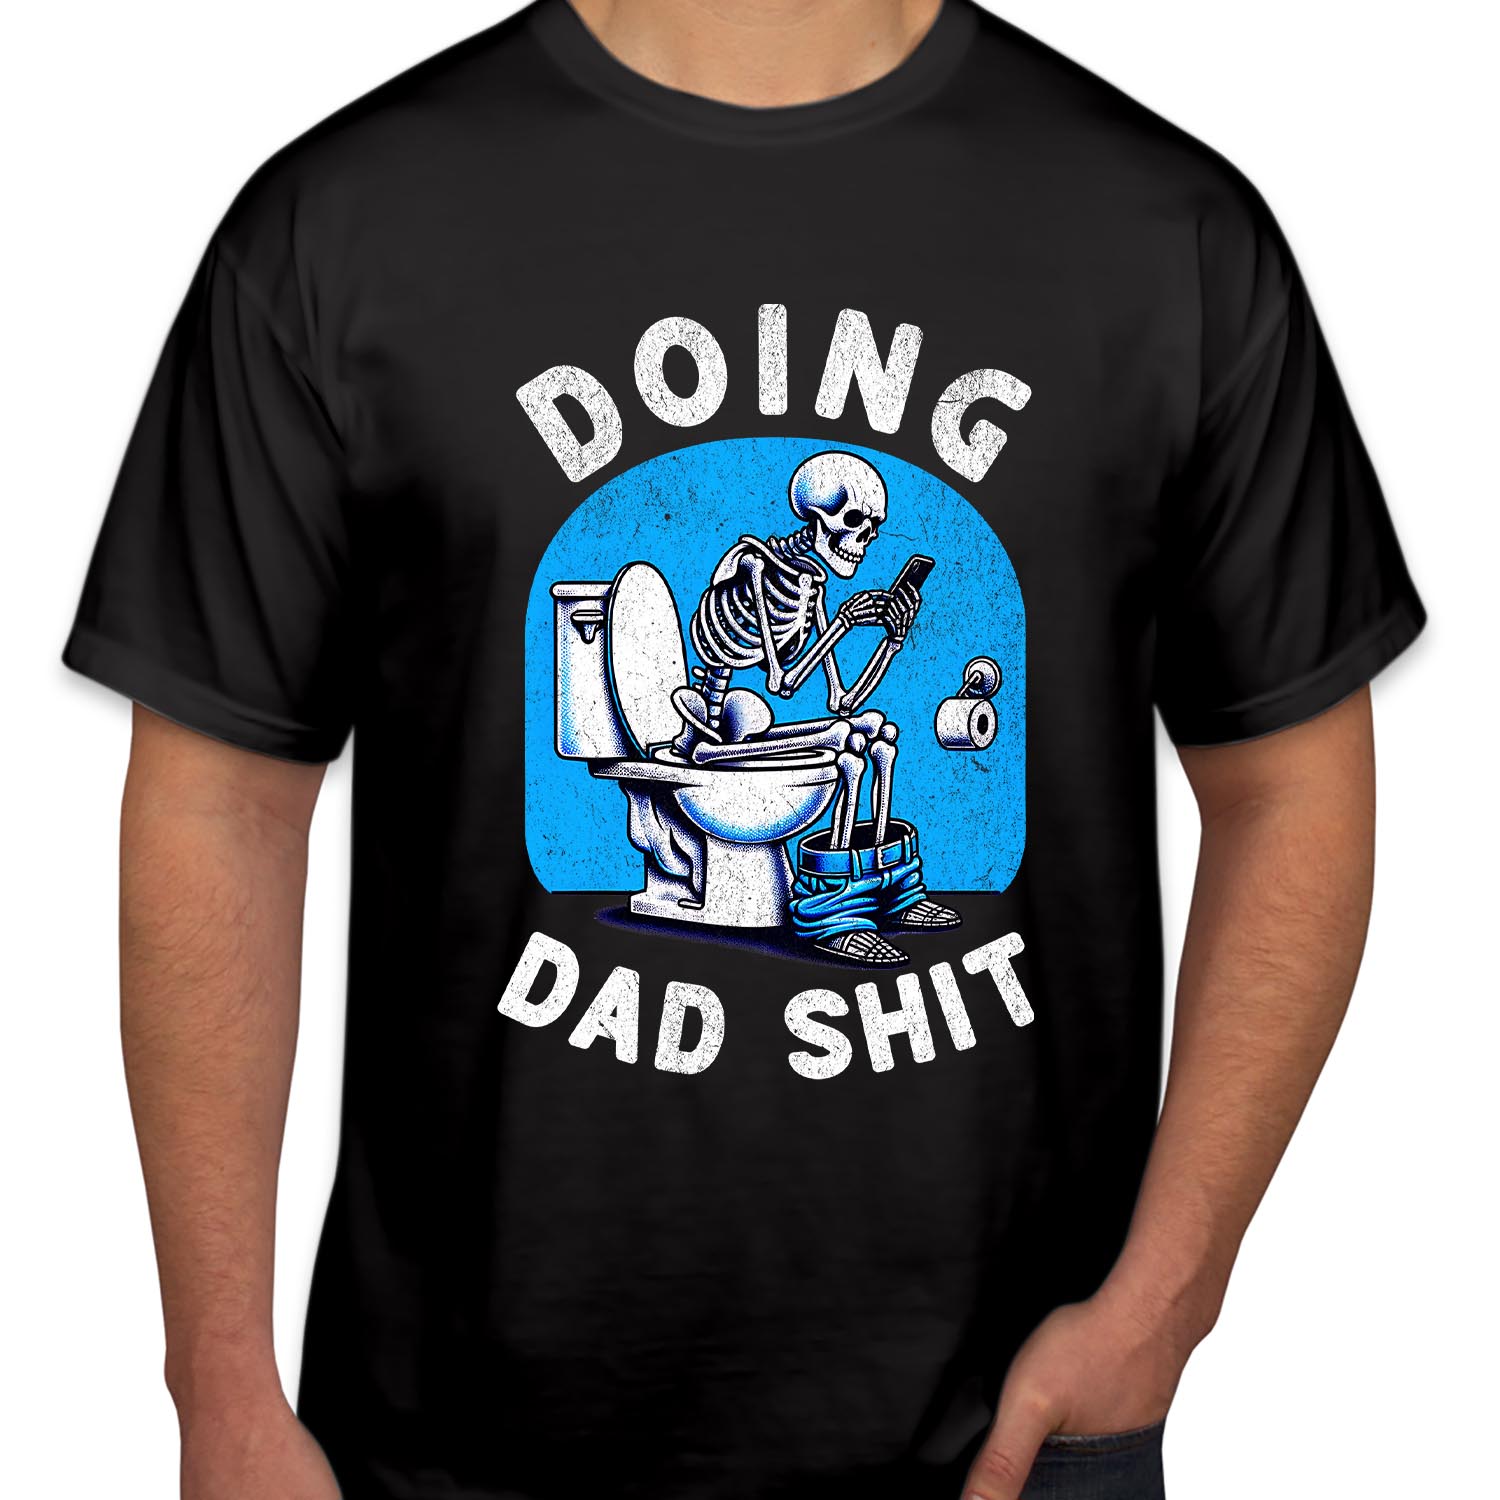 Doing Dad Shit T-Shirt Sarcastic Skeleton Dada Happy Father's Day Gift Cool Dads Tee Funny and Stylish Gift for Fathers Day Unisex T Shirt